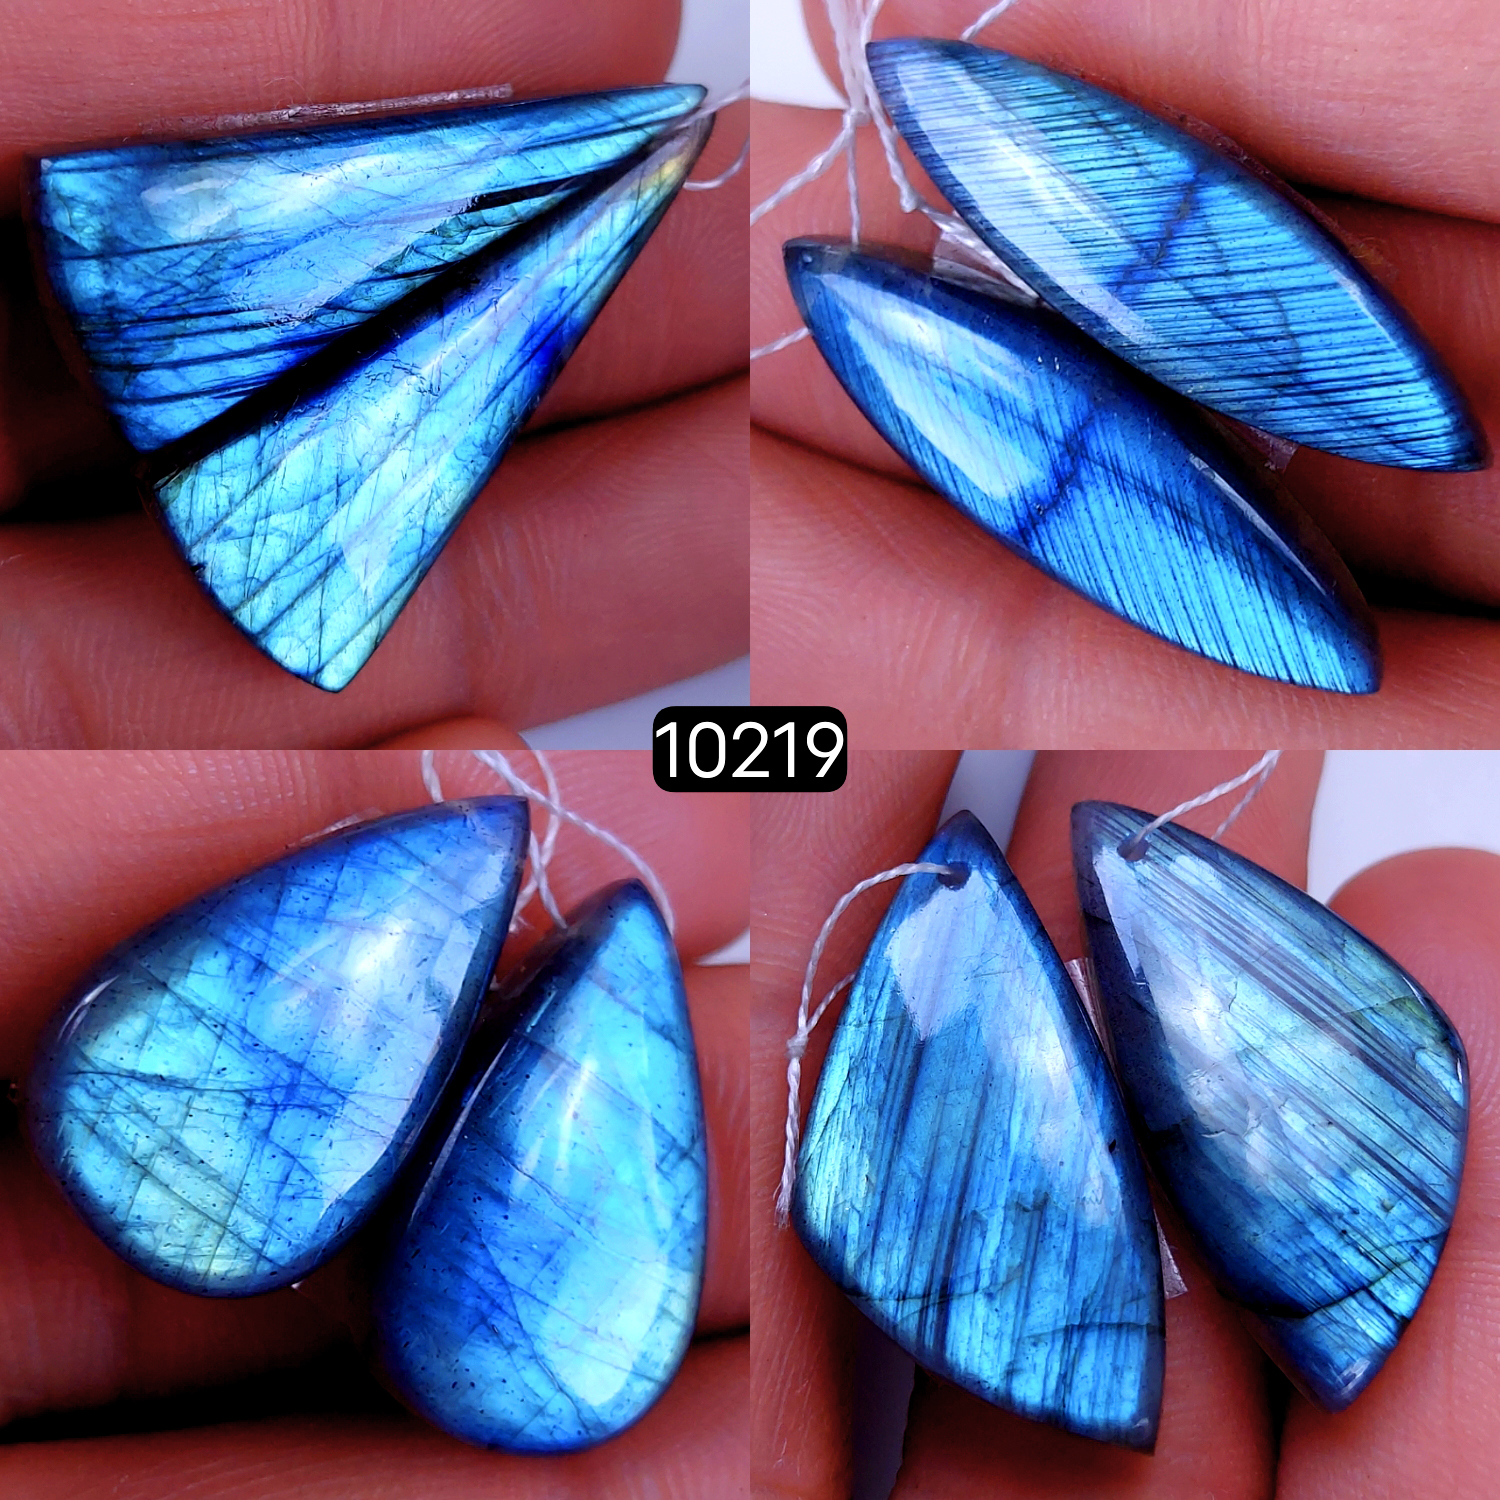 4Pair 138Cts Natural Labradorite Crystal Drill Dangle Drop Earring Pairs Silver Earrings Blue Labradorite Hoop Jewelry  35x14 24x14mm #10219